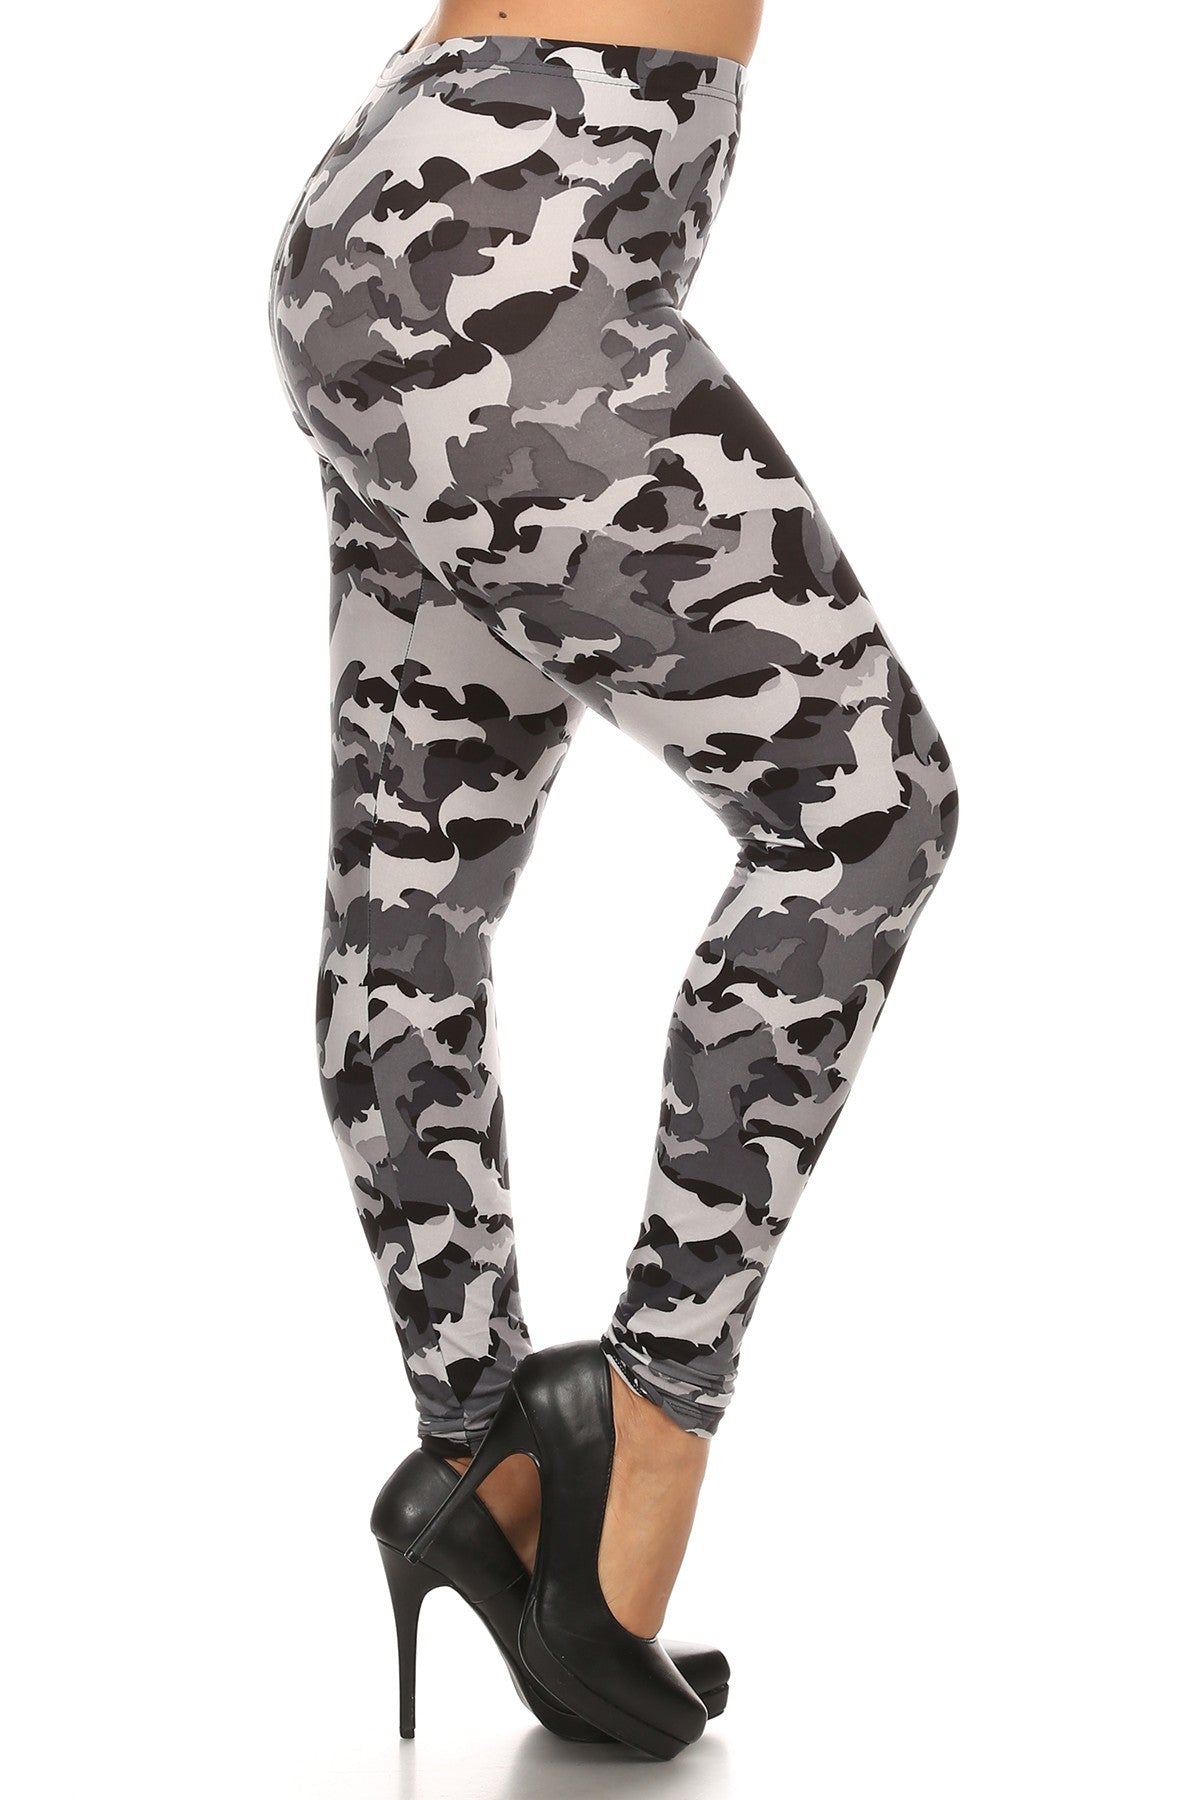 Plus Size Print, Full Length Leggings In A Slim Fitting Style With A Banded High Waist. - LOLA LUXE